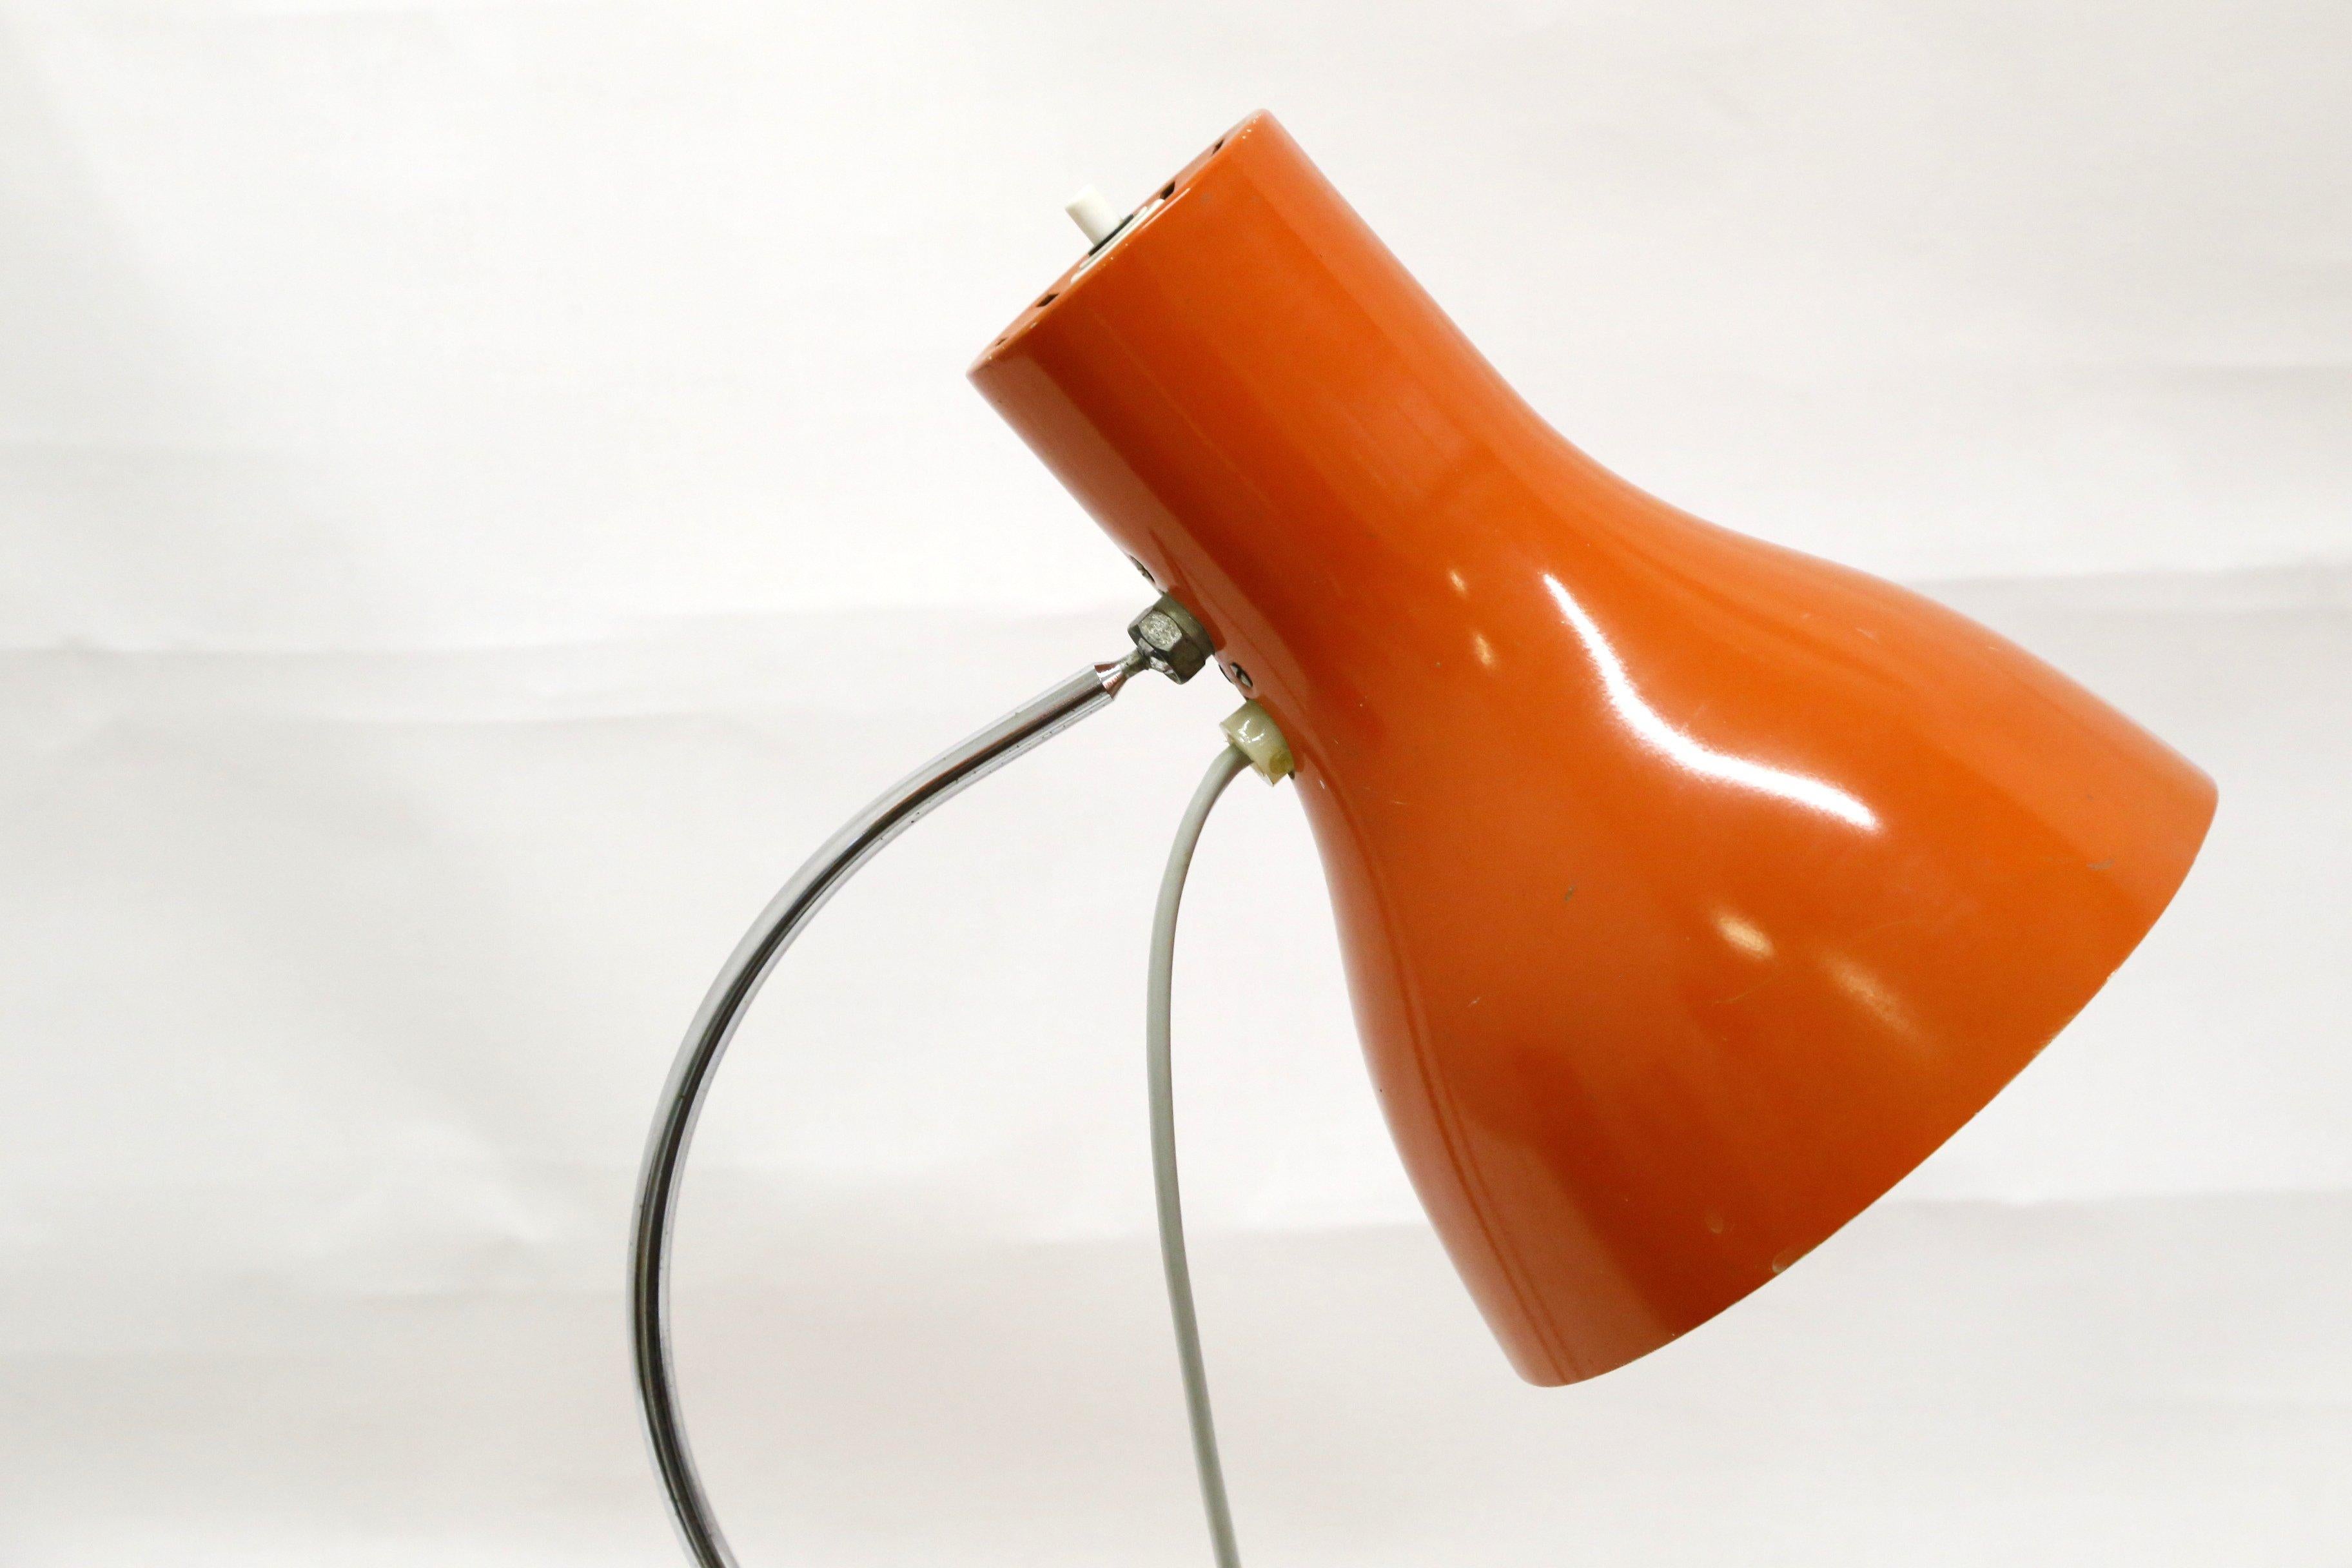 Mid-20th Century Space Age Table Lamp, Chrome-Plated and Orange Color, by Josef Hurka, 1960s